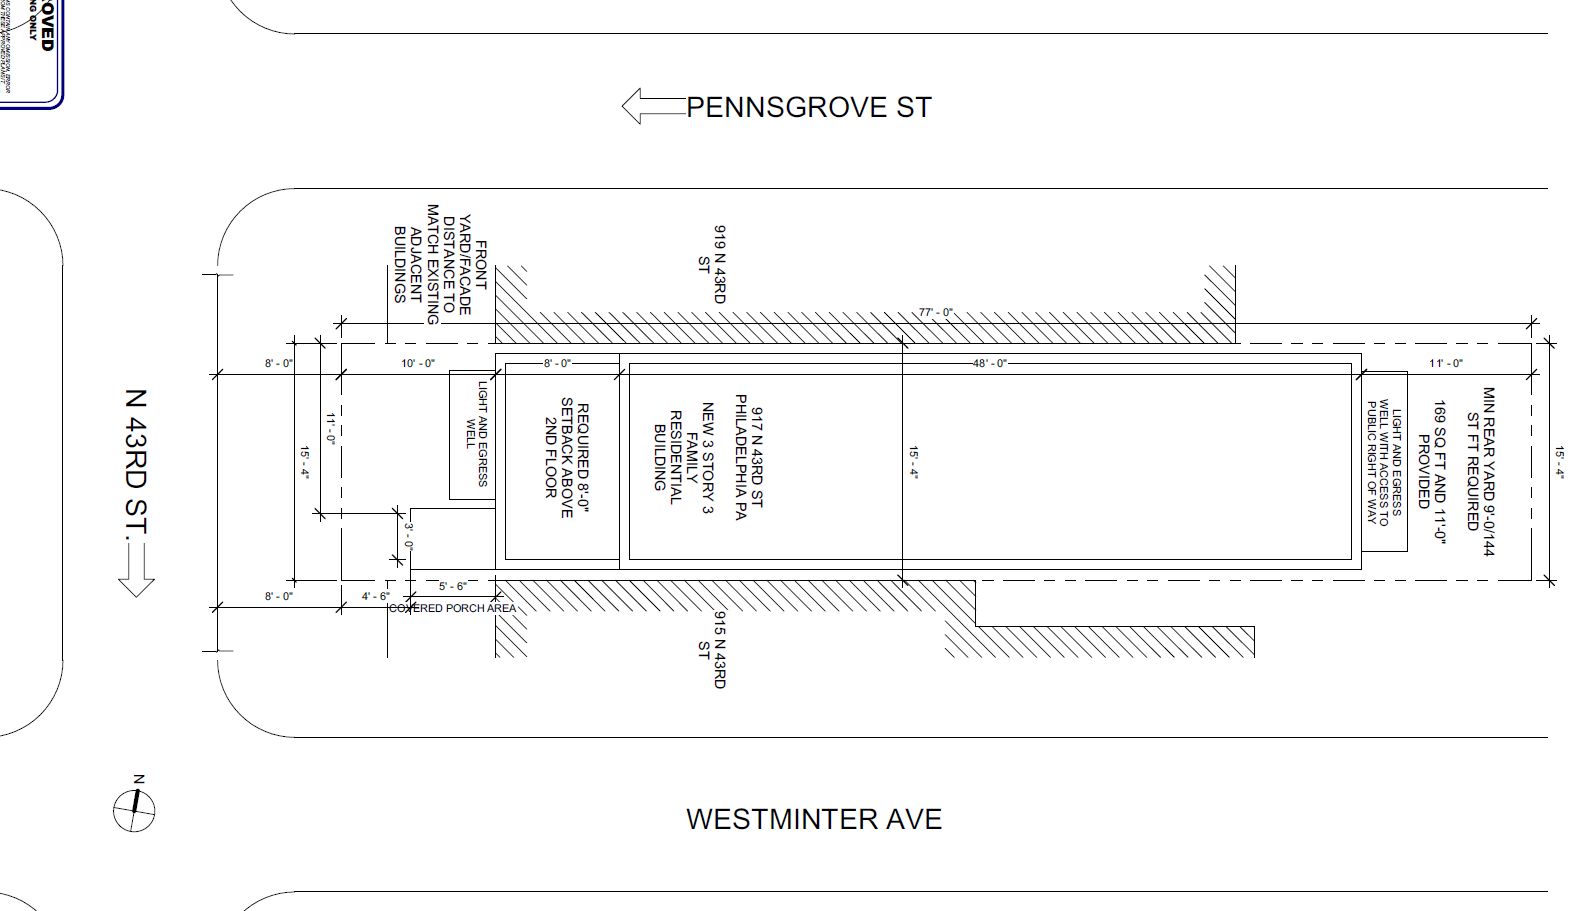 917 North 43rd Street. Site plan (revised version). Credit: J Design and Consultants via the Department of Planning and Development of the City of Philadelphia